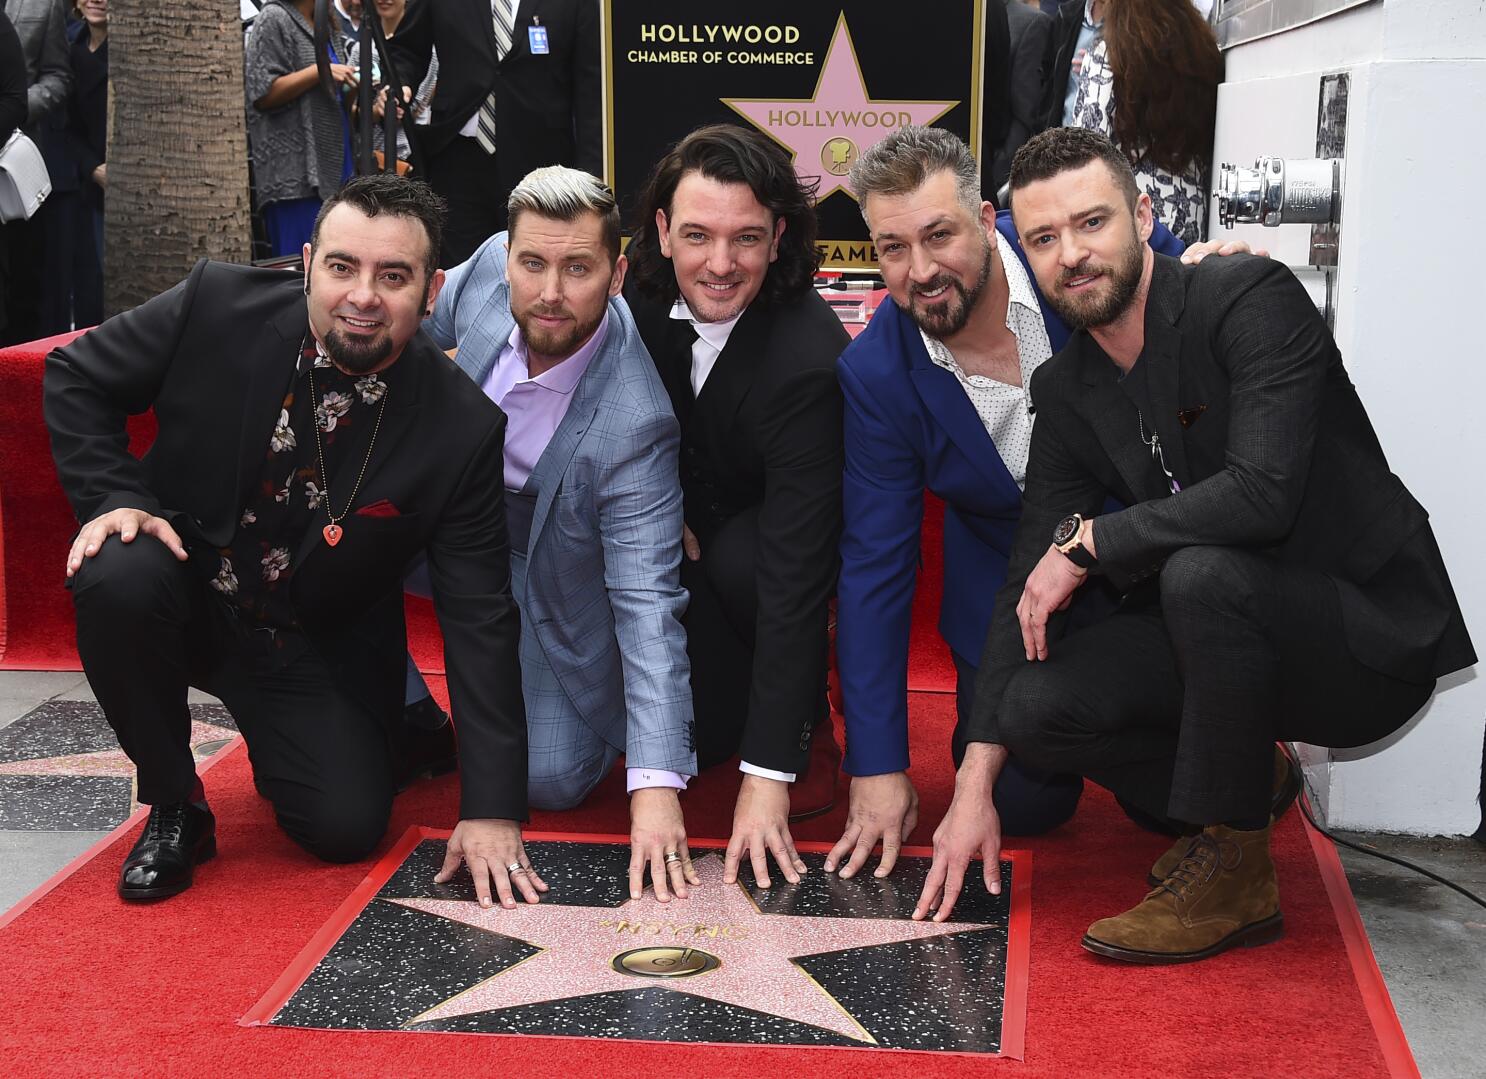 NSYNC won't tour - but Justin Timberlake is heading out on the road, Entertainment